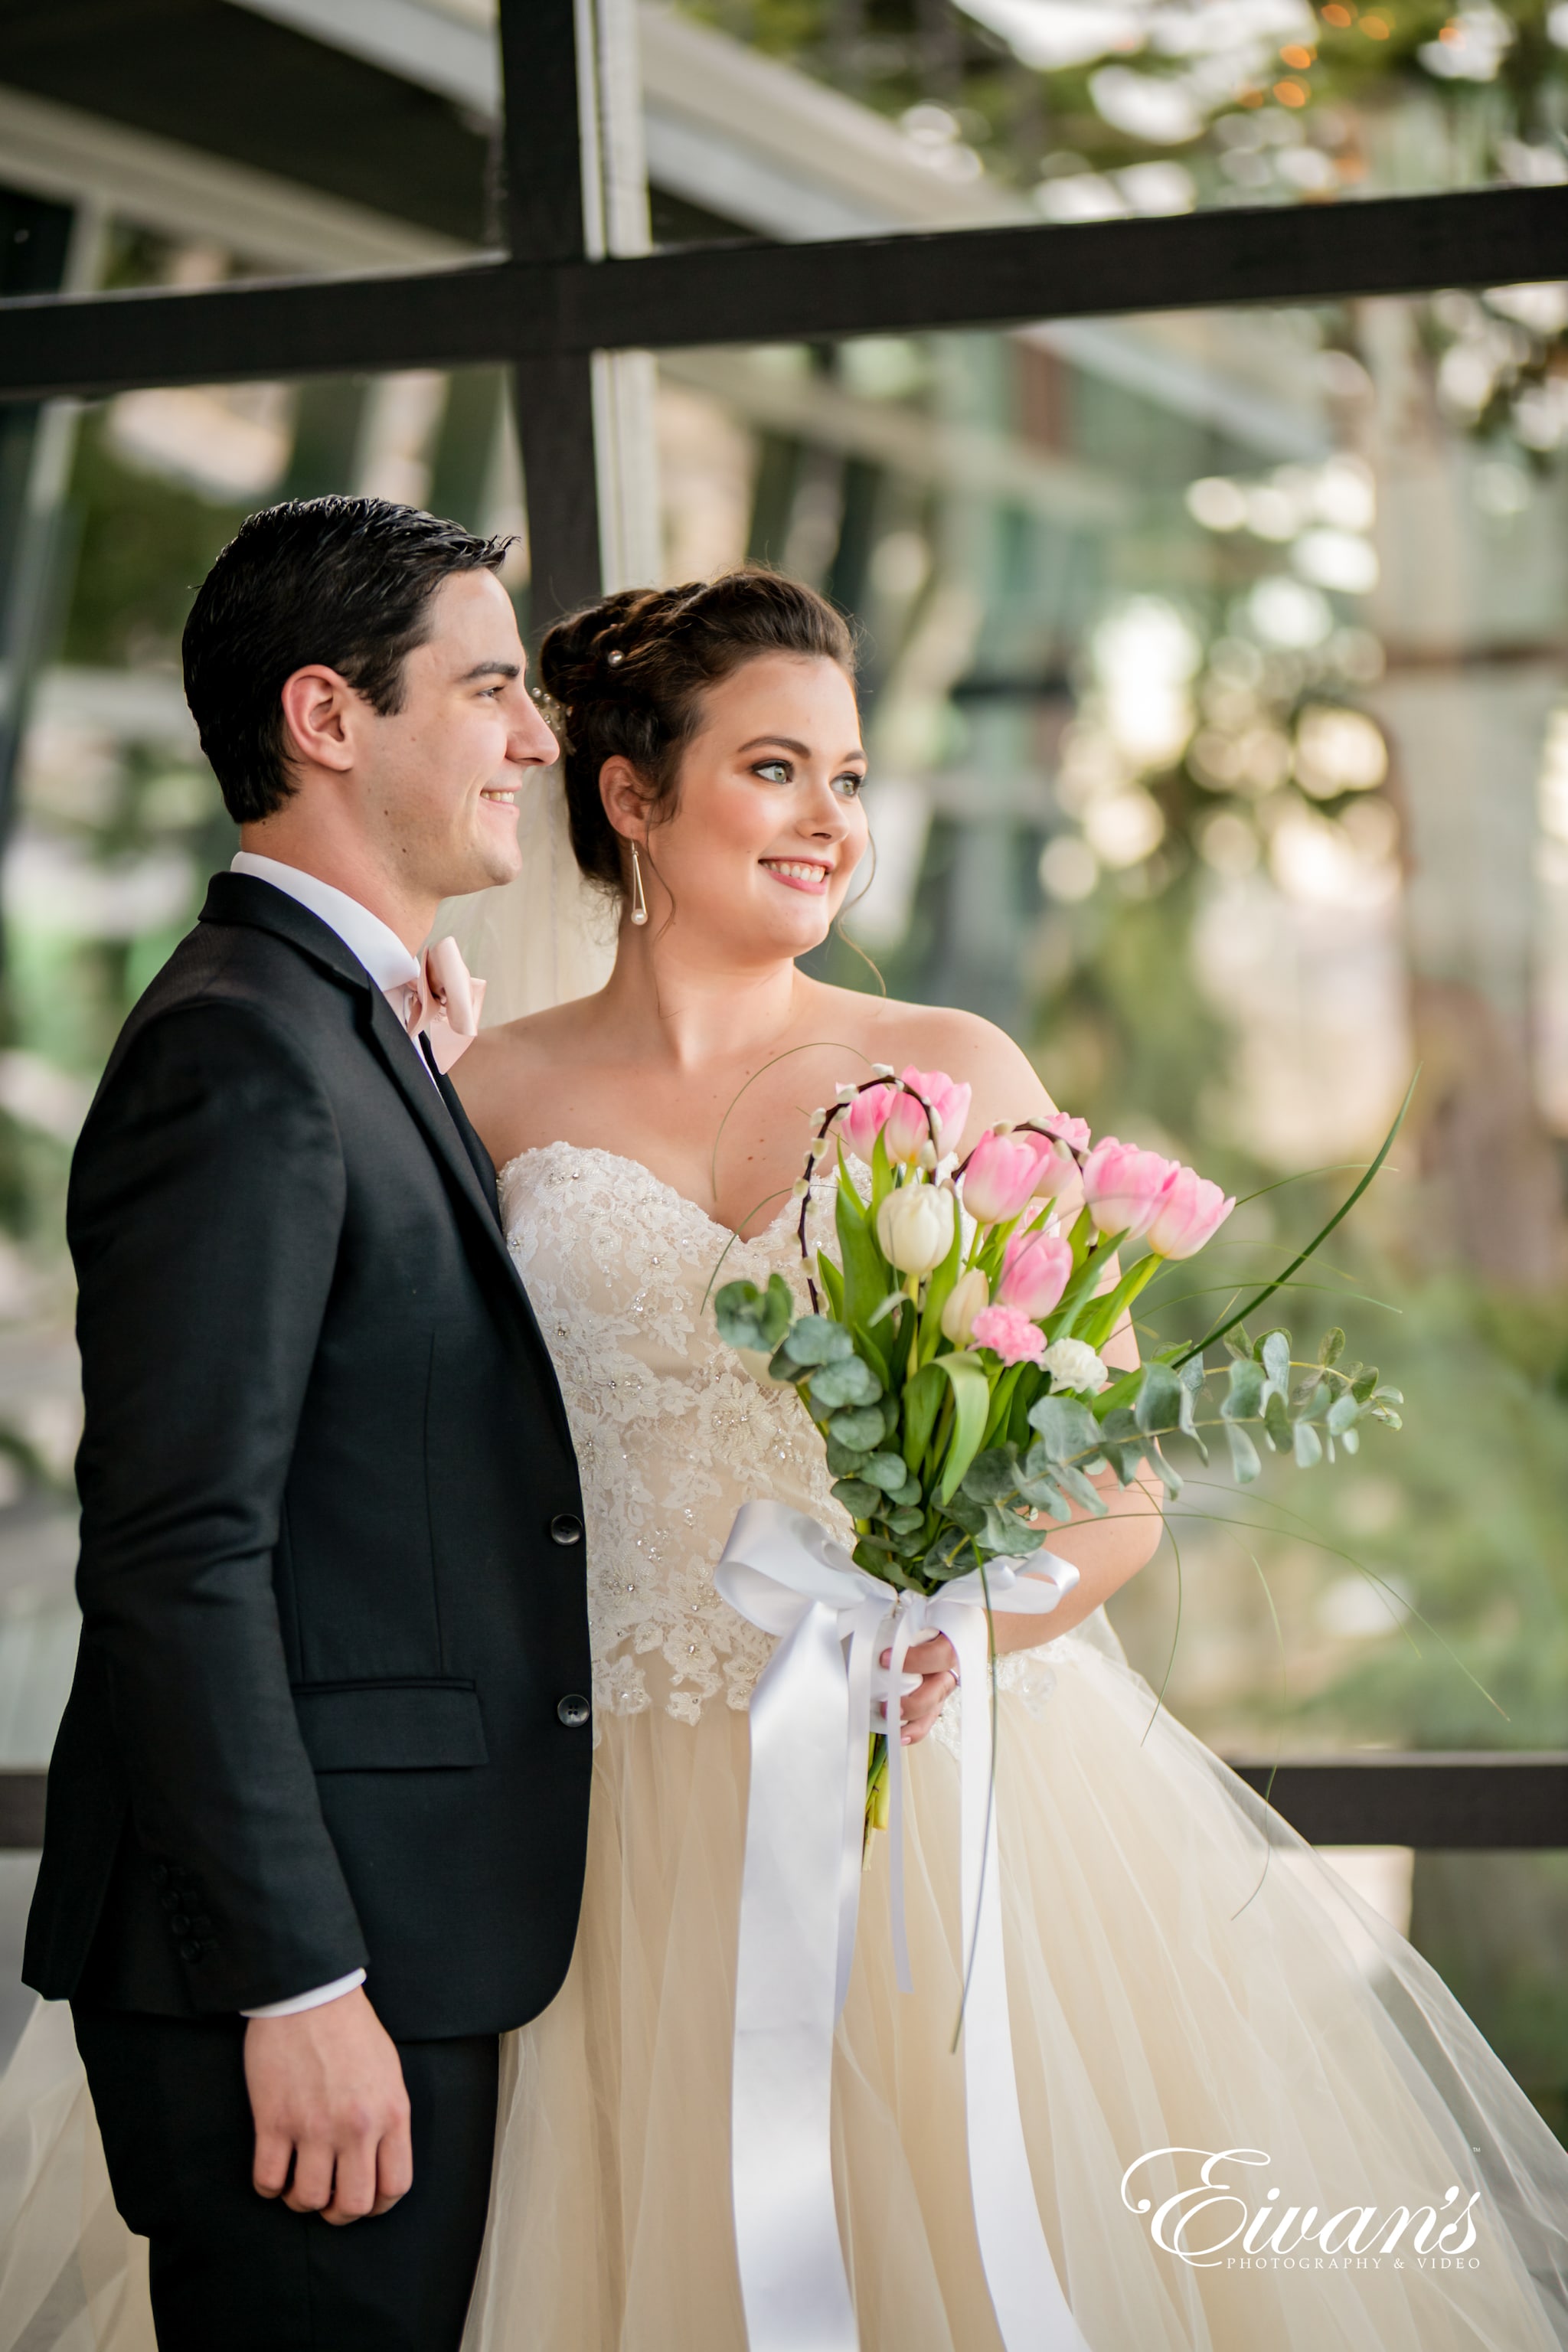 man in black suit and woman in white wedding dress holding bouquet of flowers